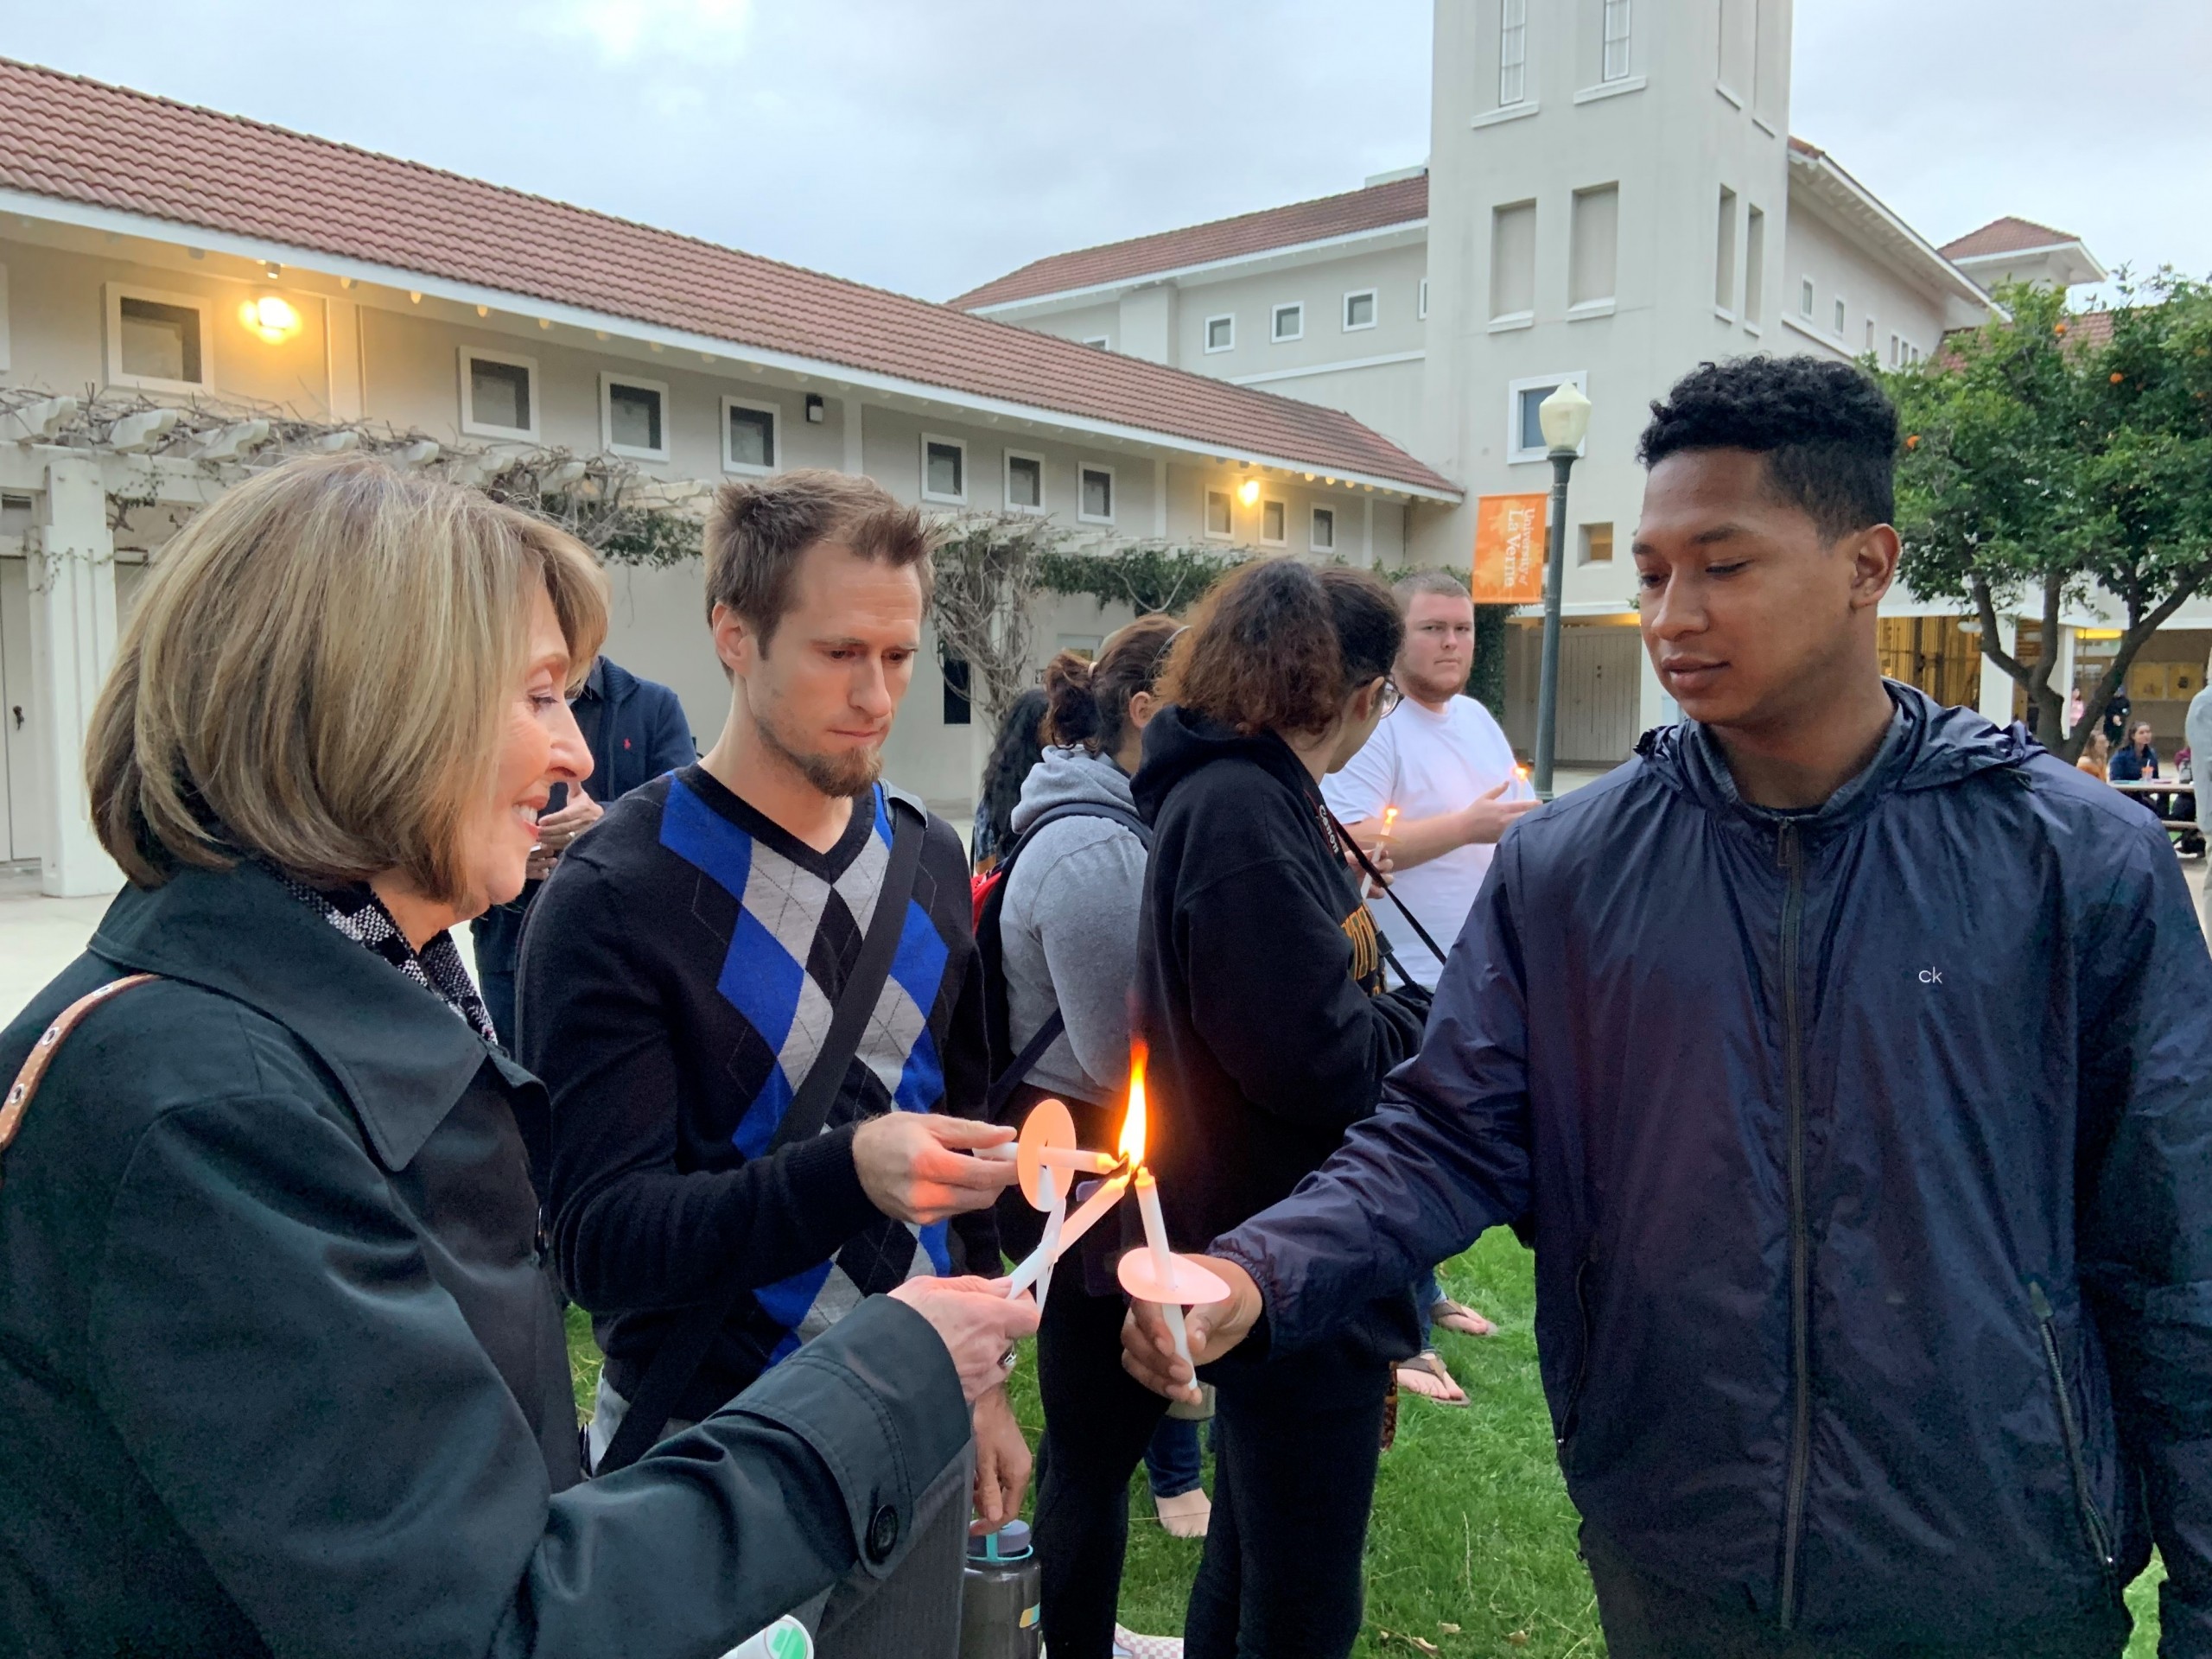 Students gather to light candles during vigil